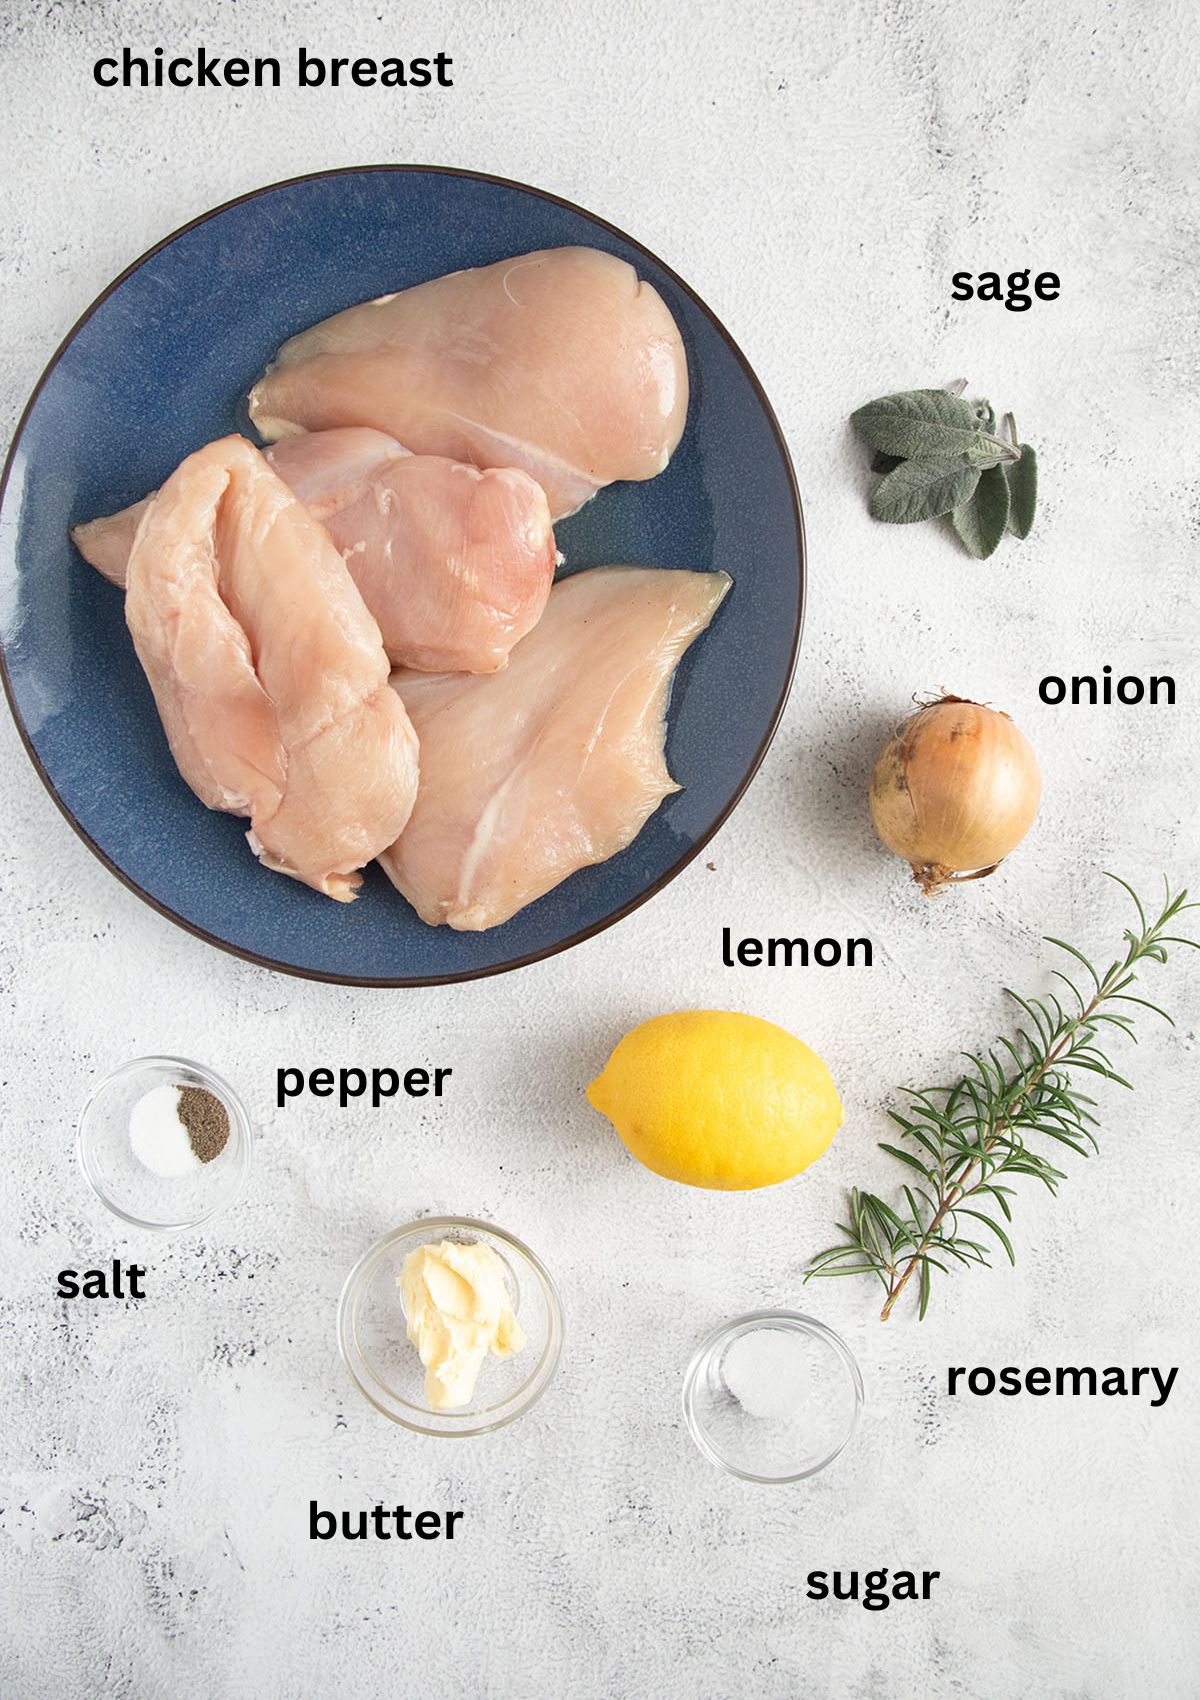 labeled ingredients for making italian chicken with herbs on the table.